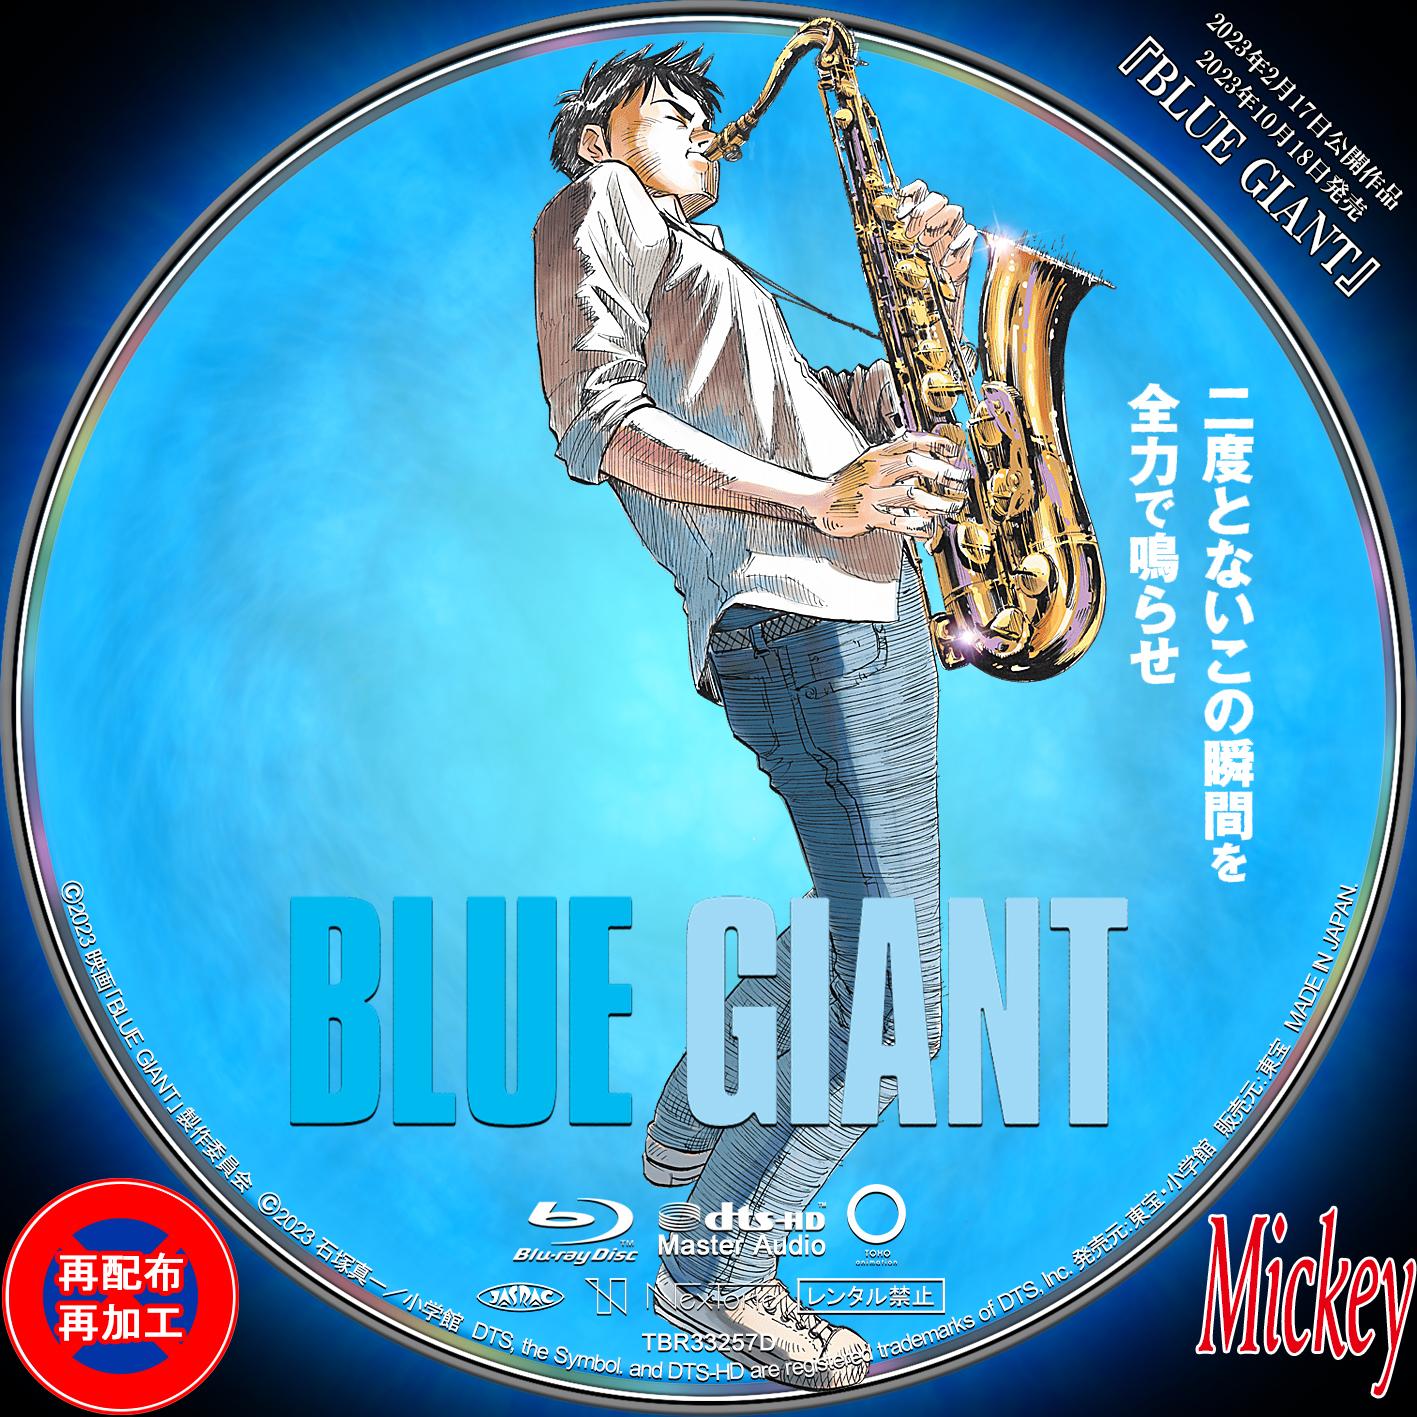 BLUE GIANT』Blu-ray盤 : Mickey's Request Label Collection